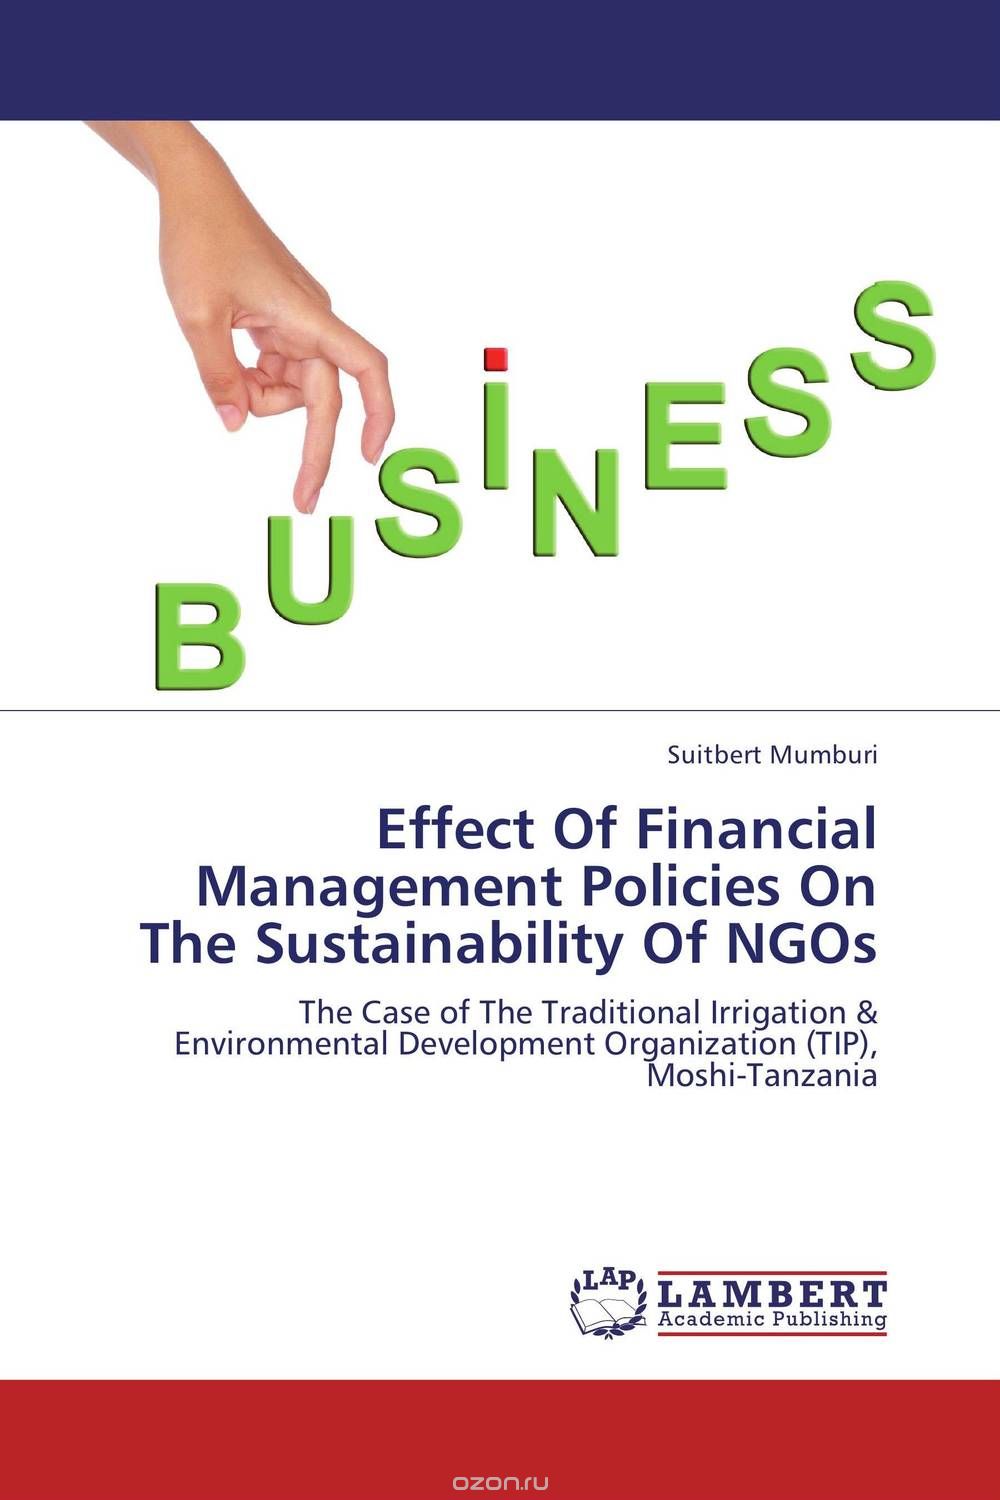 Effect Of Financial Management Policies On The Sustainability Of NGOs